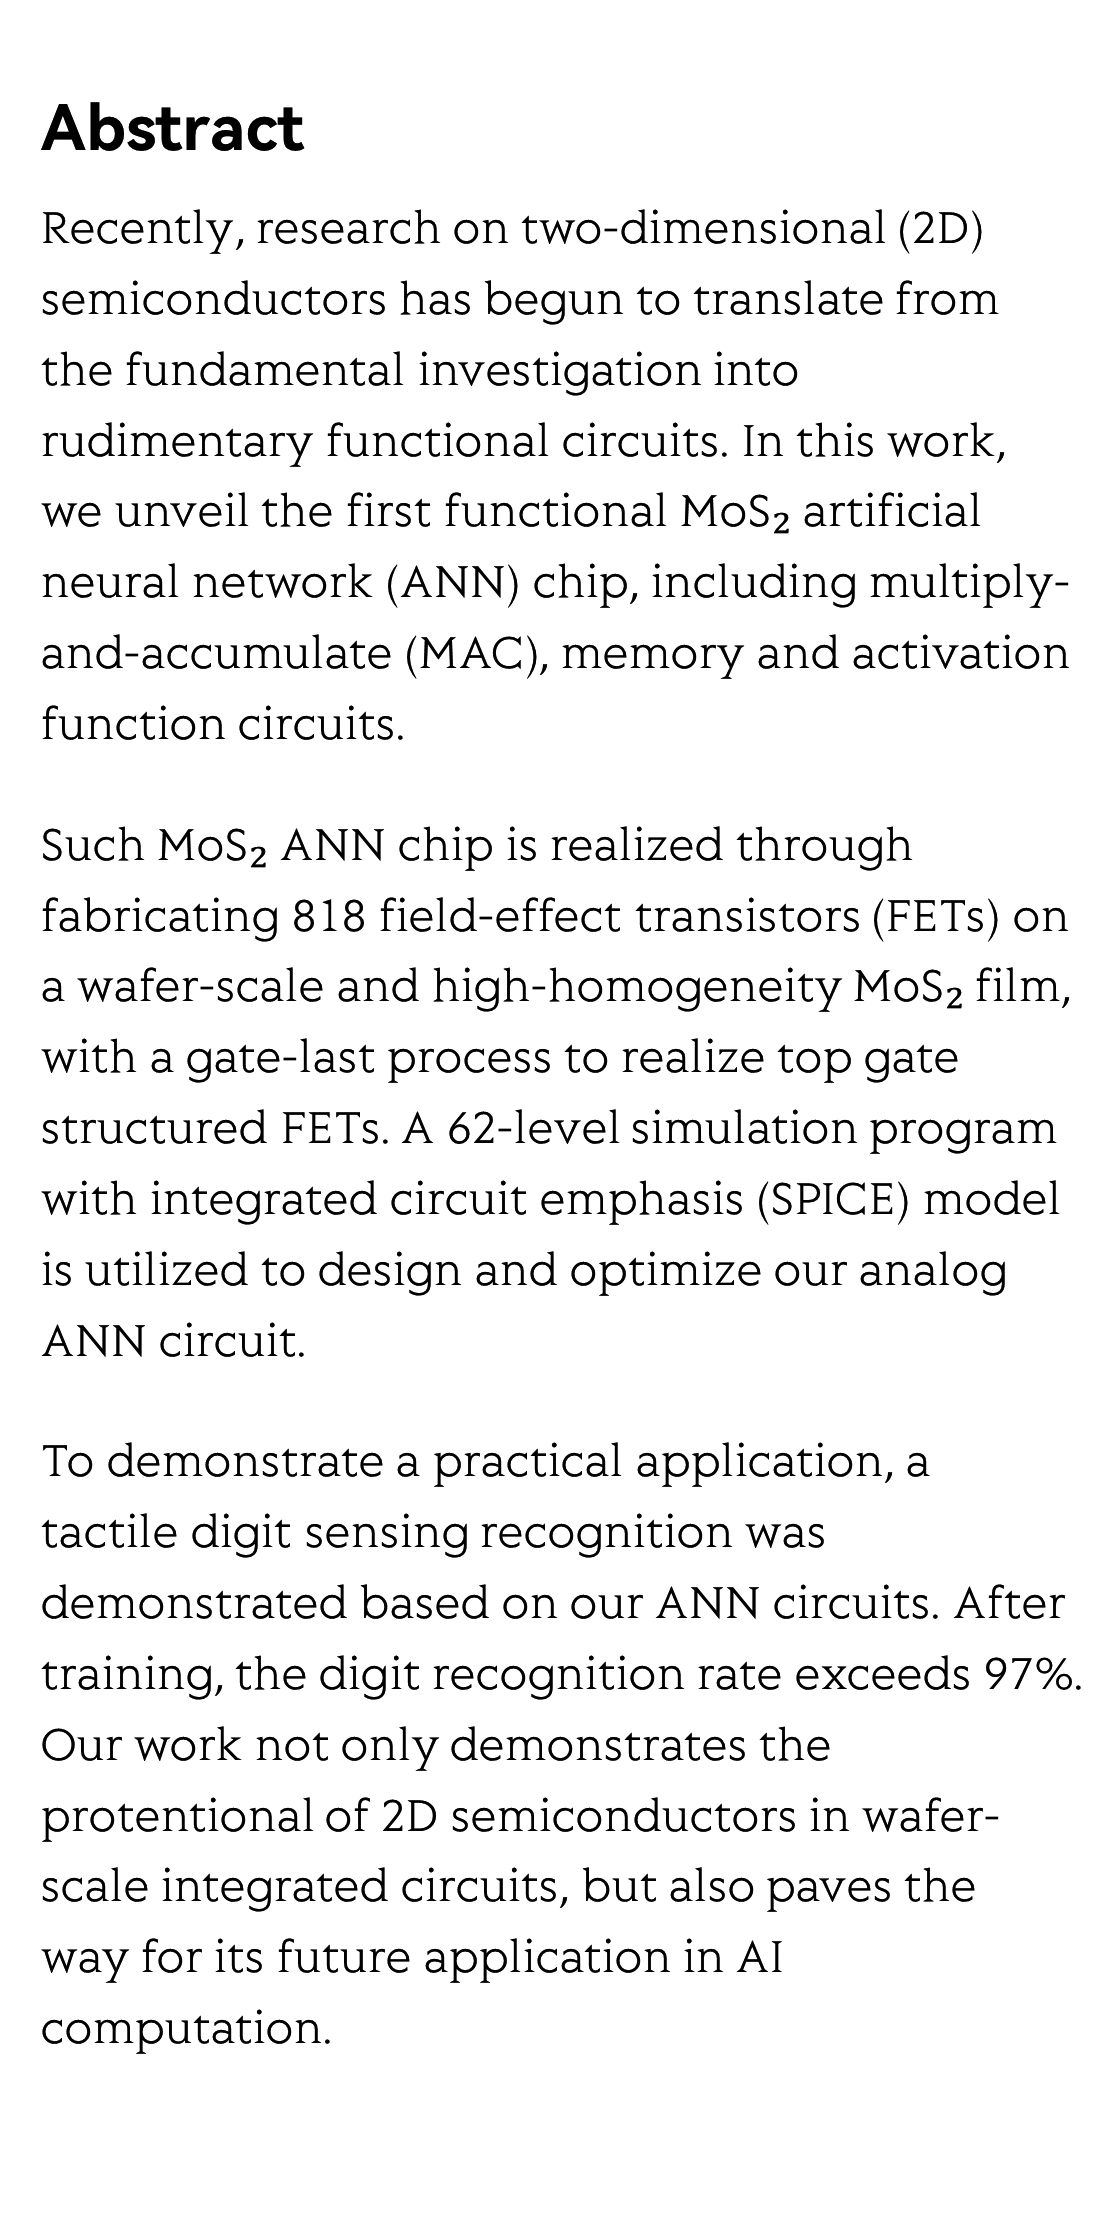 An artificial neural network chip based on two-dimensional semiconductor_2